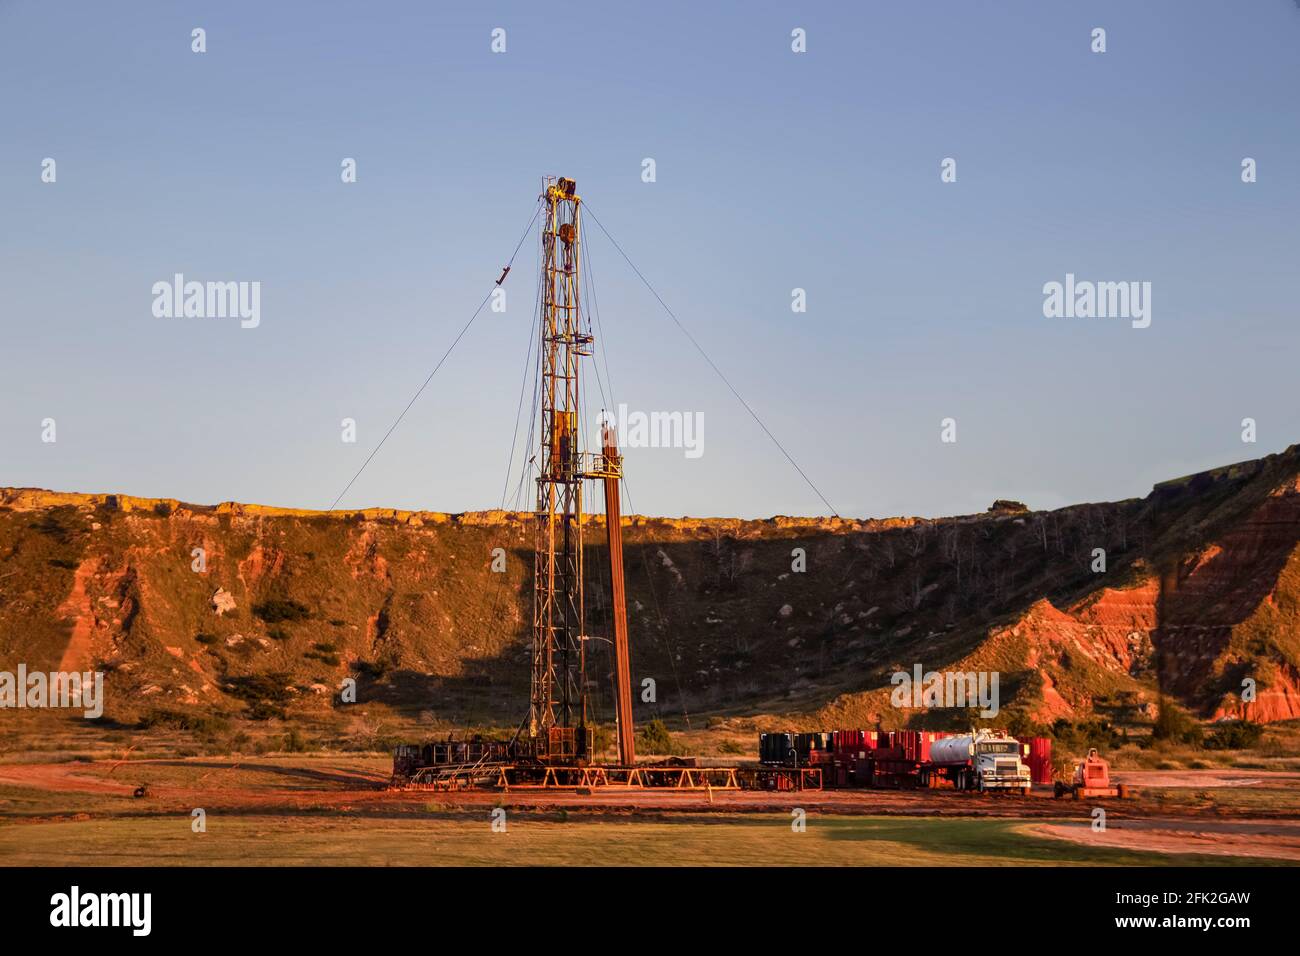 Workover rig working on a previously drilled well trying to restore production through repair in Western Oklahoma with sunset reflecting off red dirt Stock Photo